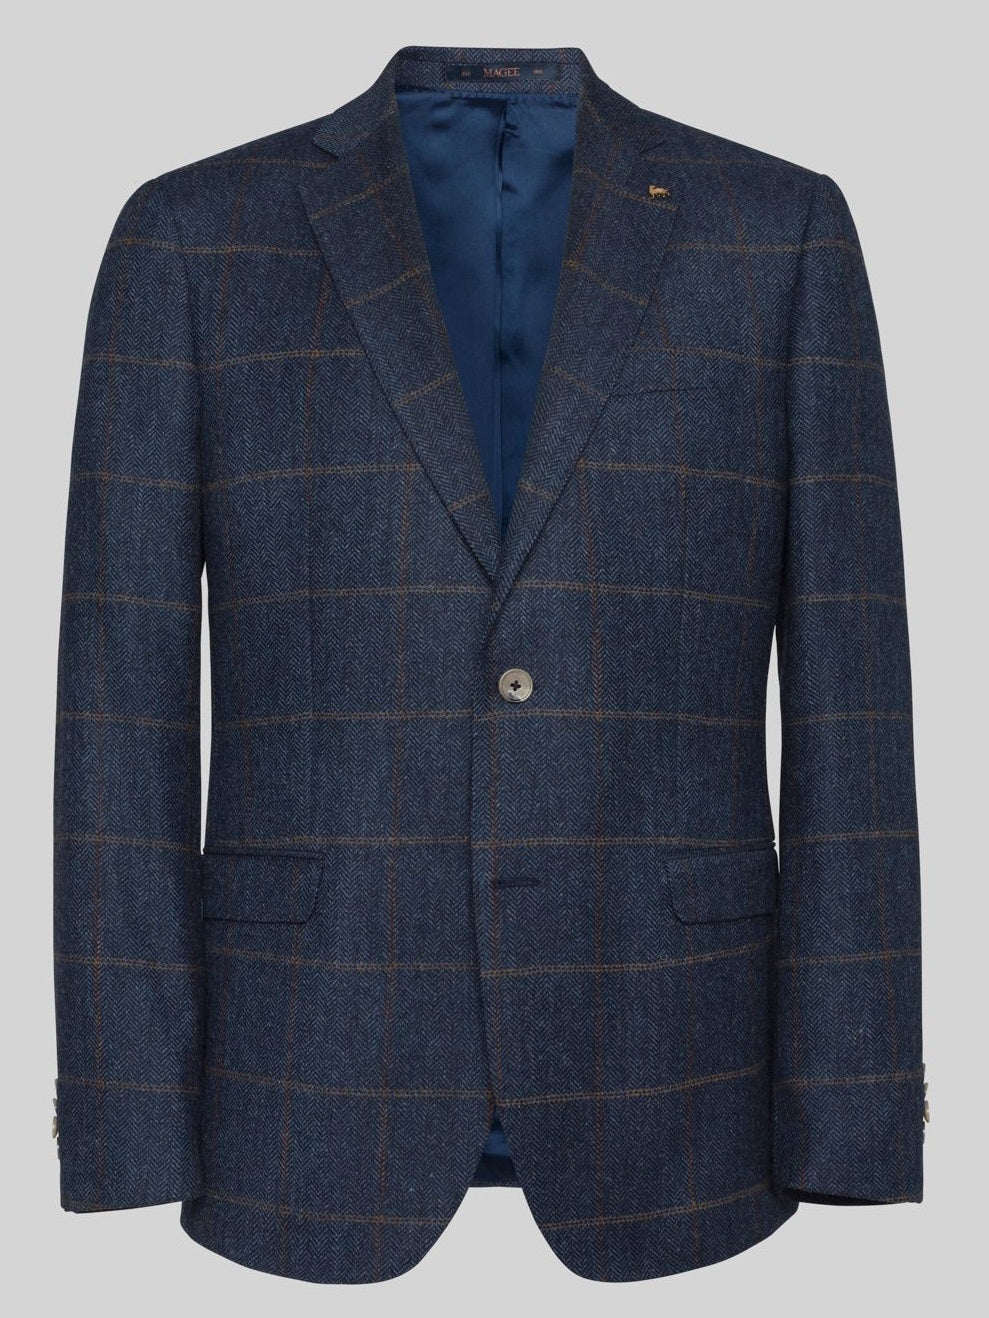 MAGEE Donegal Tweed Jacket - Mens Clady - Navy With Subtle Overcheck ...